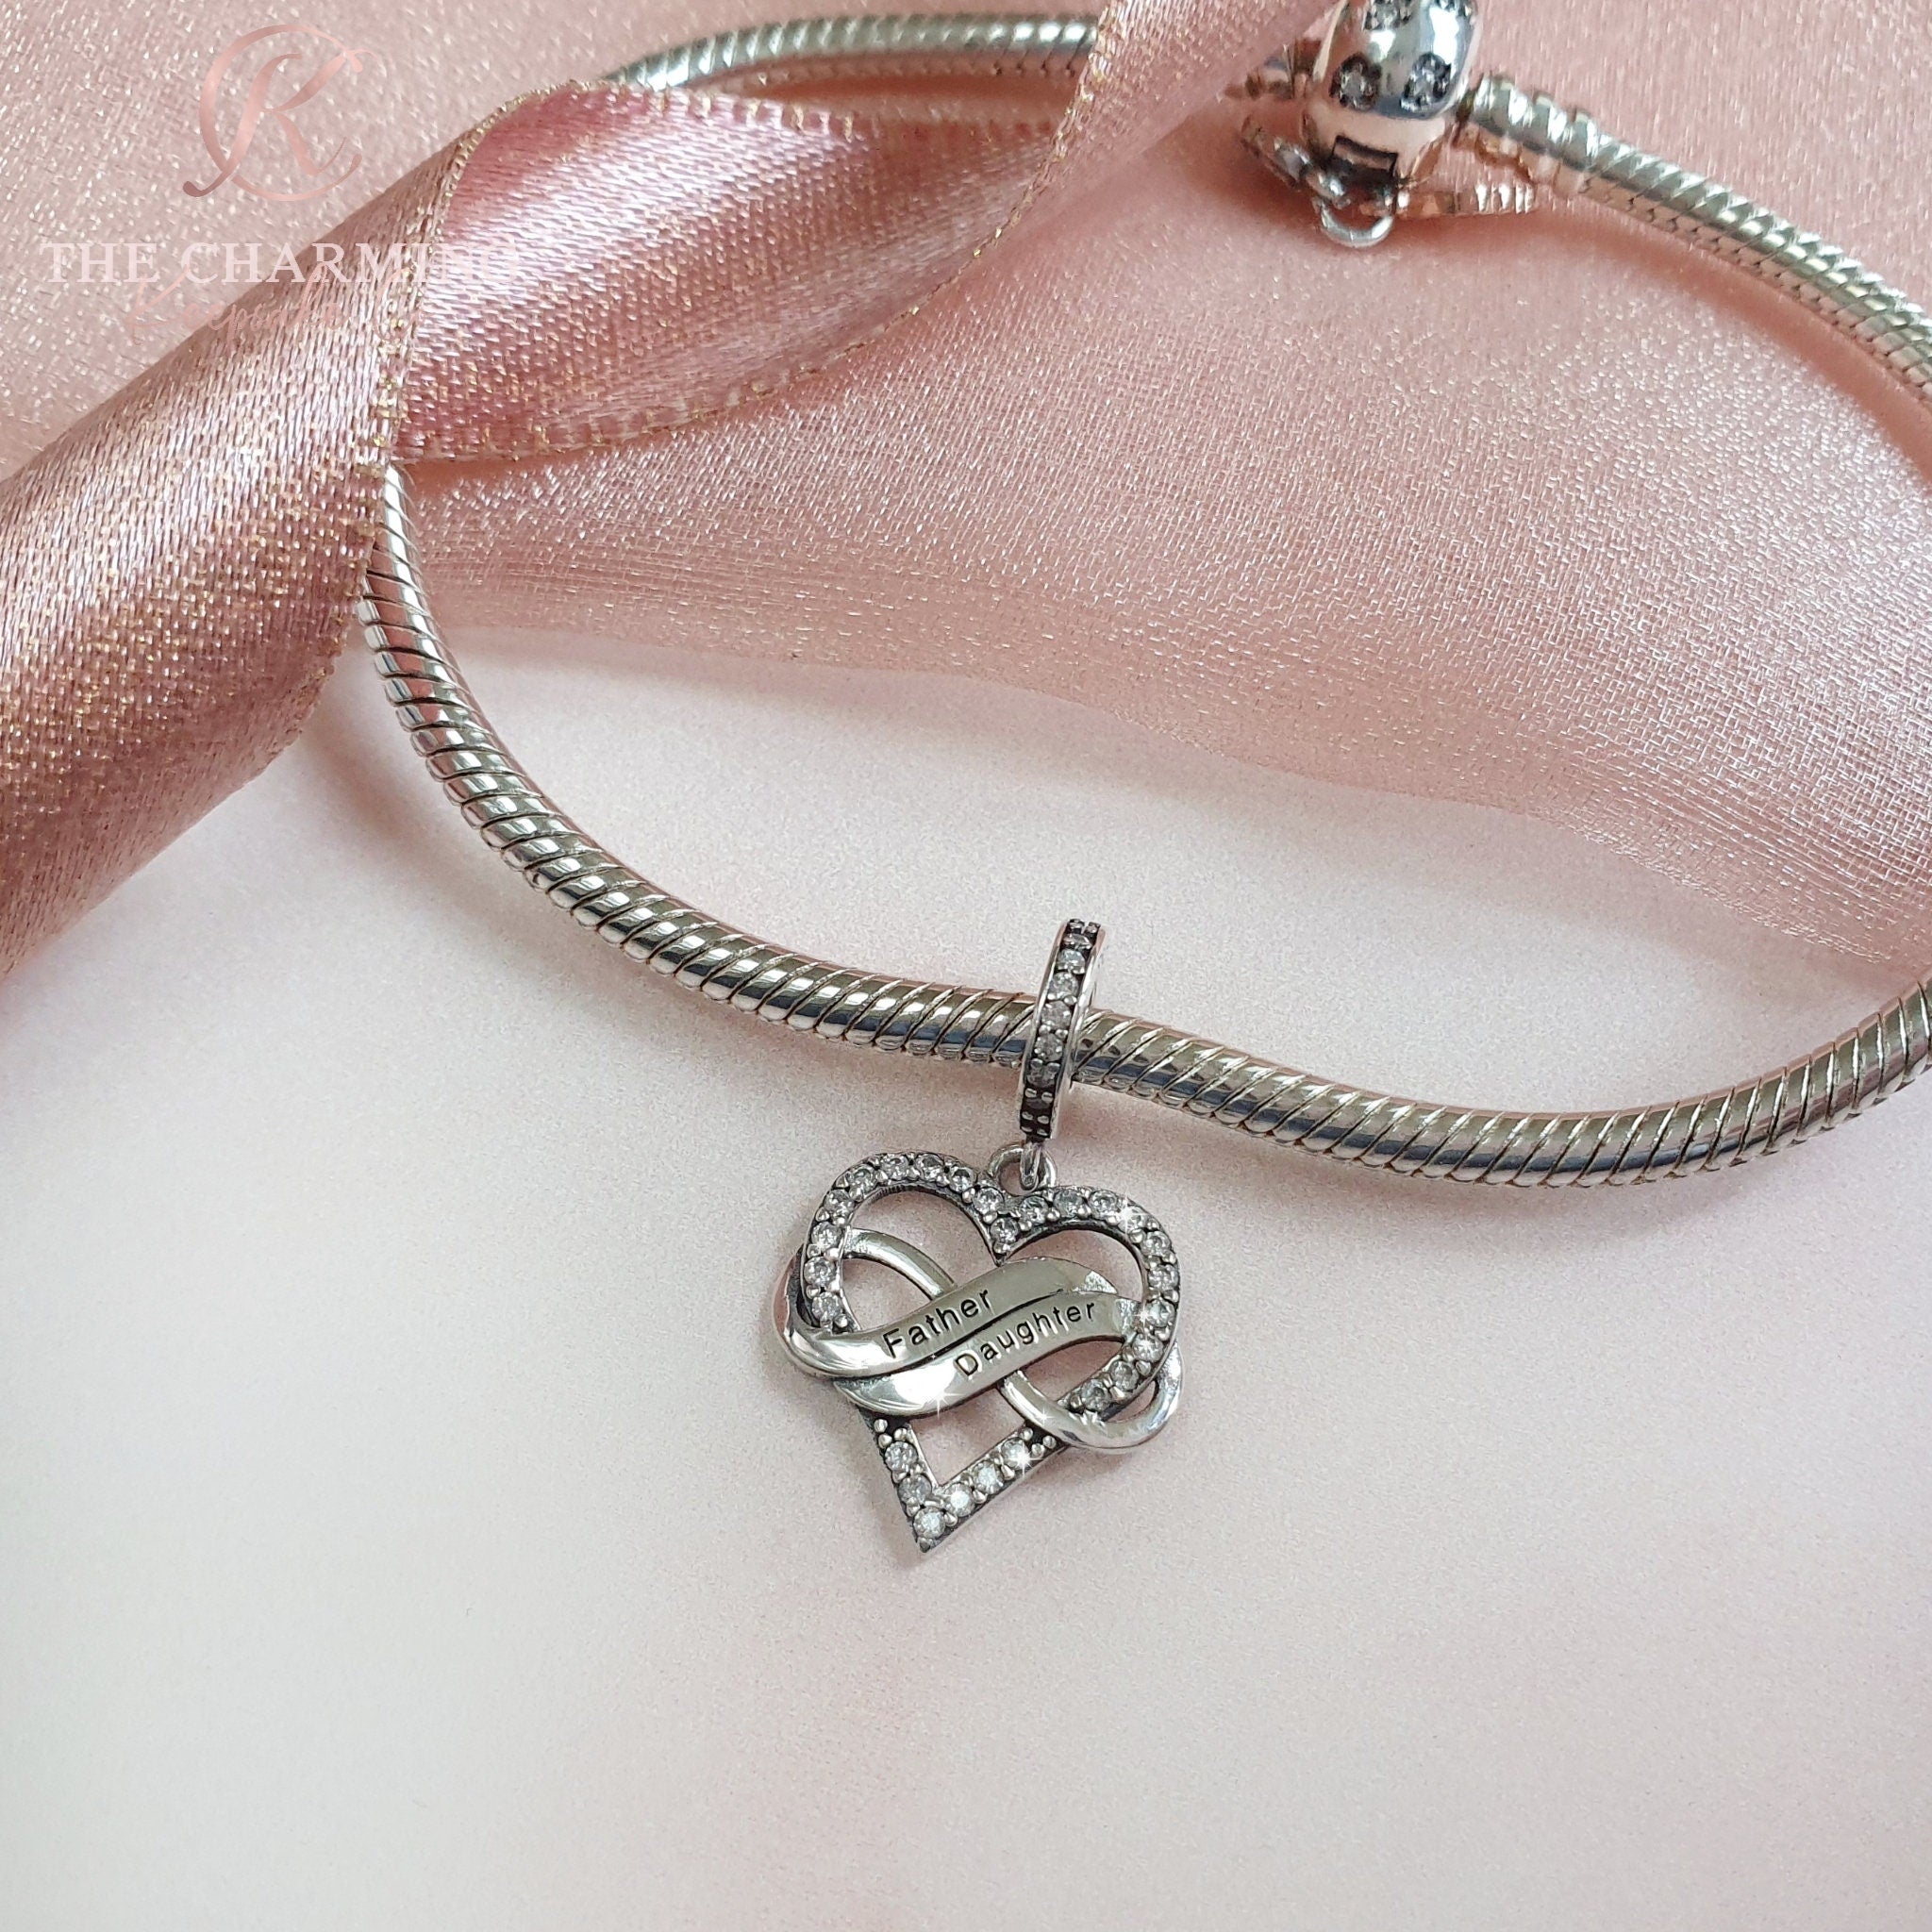 Show Your Mom How Much You Care With These Pandora Mother's Day Charms